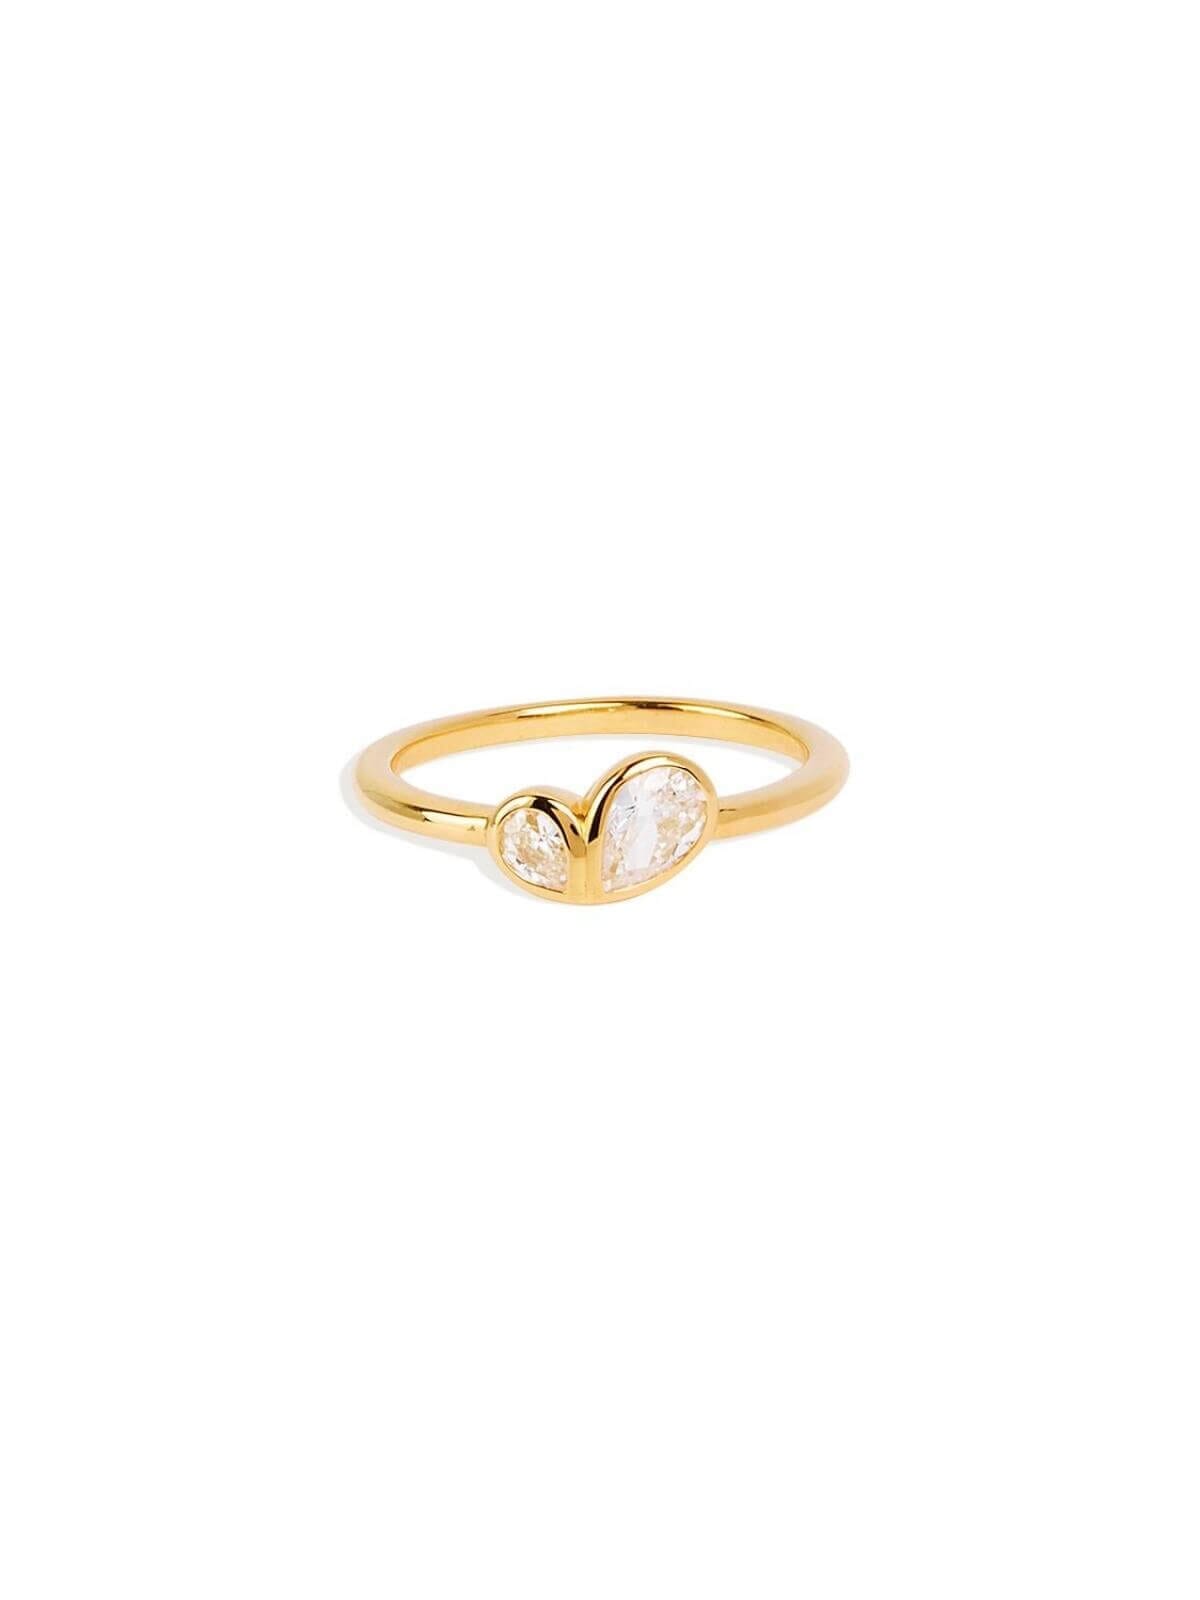 By Charlotte | Adored Ring - Gold | Perlu